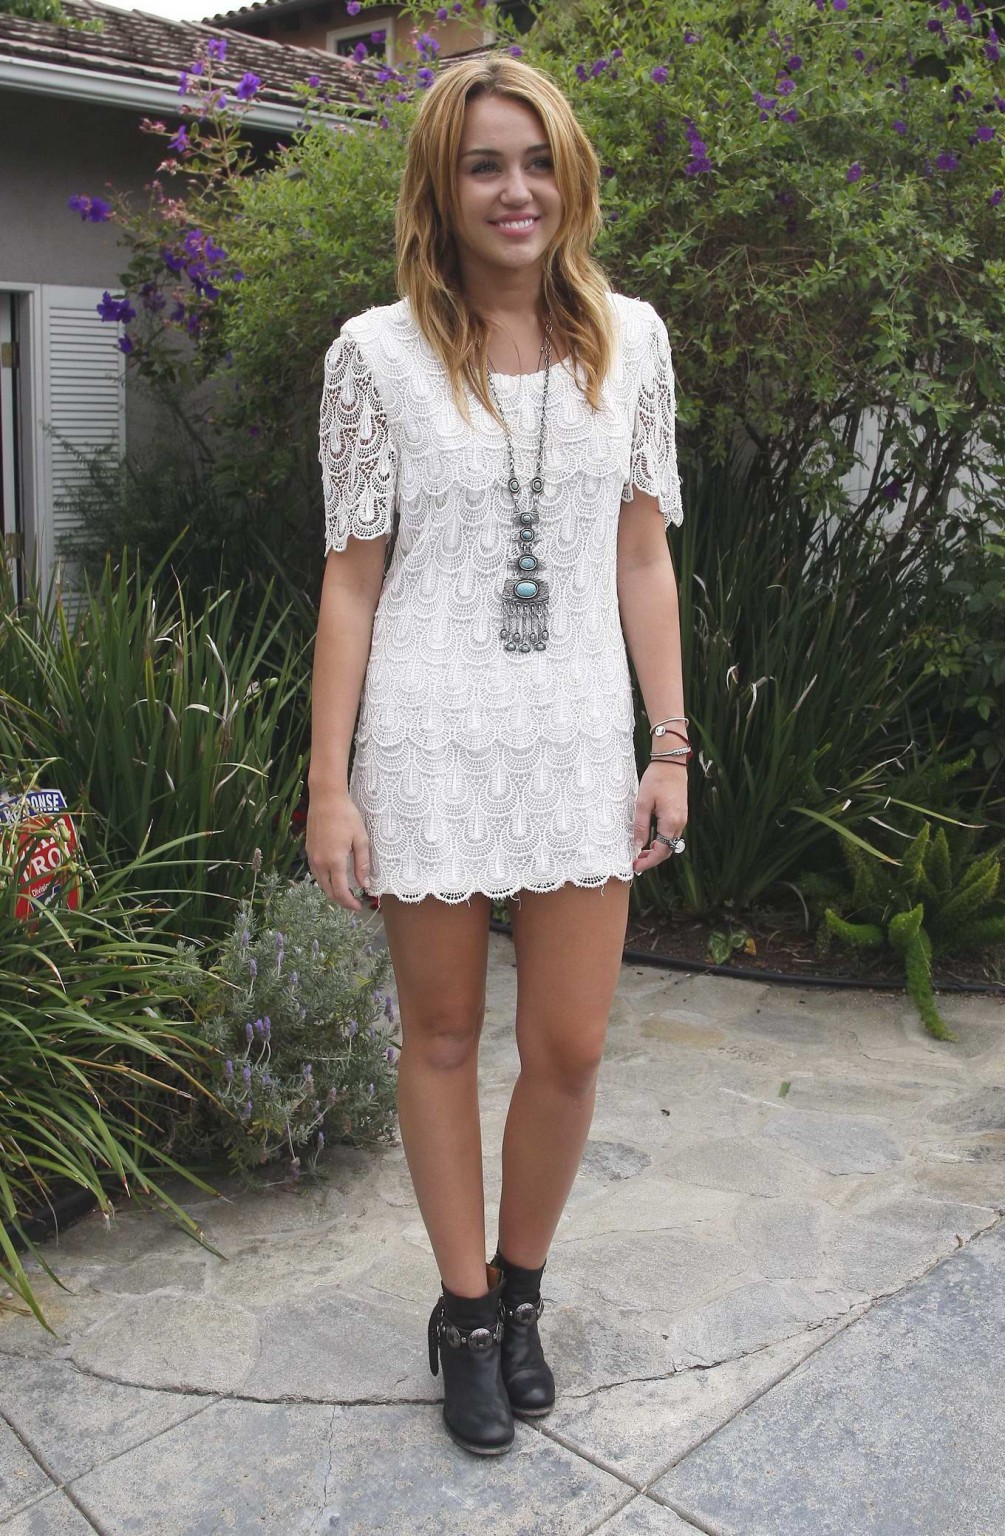 Miley Cyrus leggy wearing white mini dress at the house party #75289949